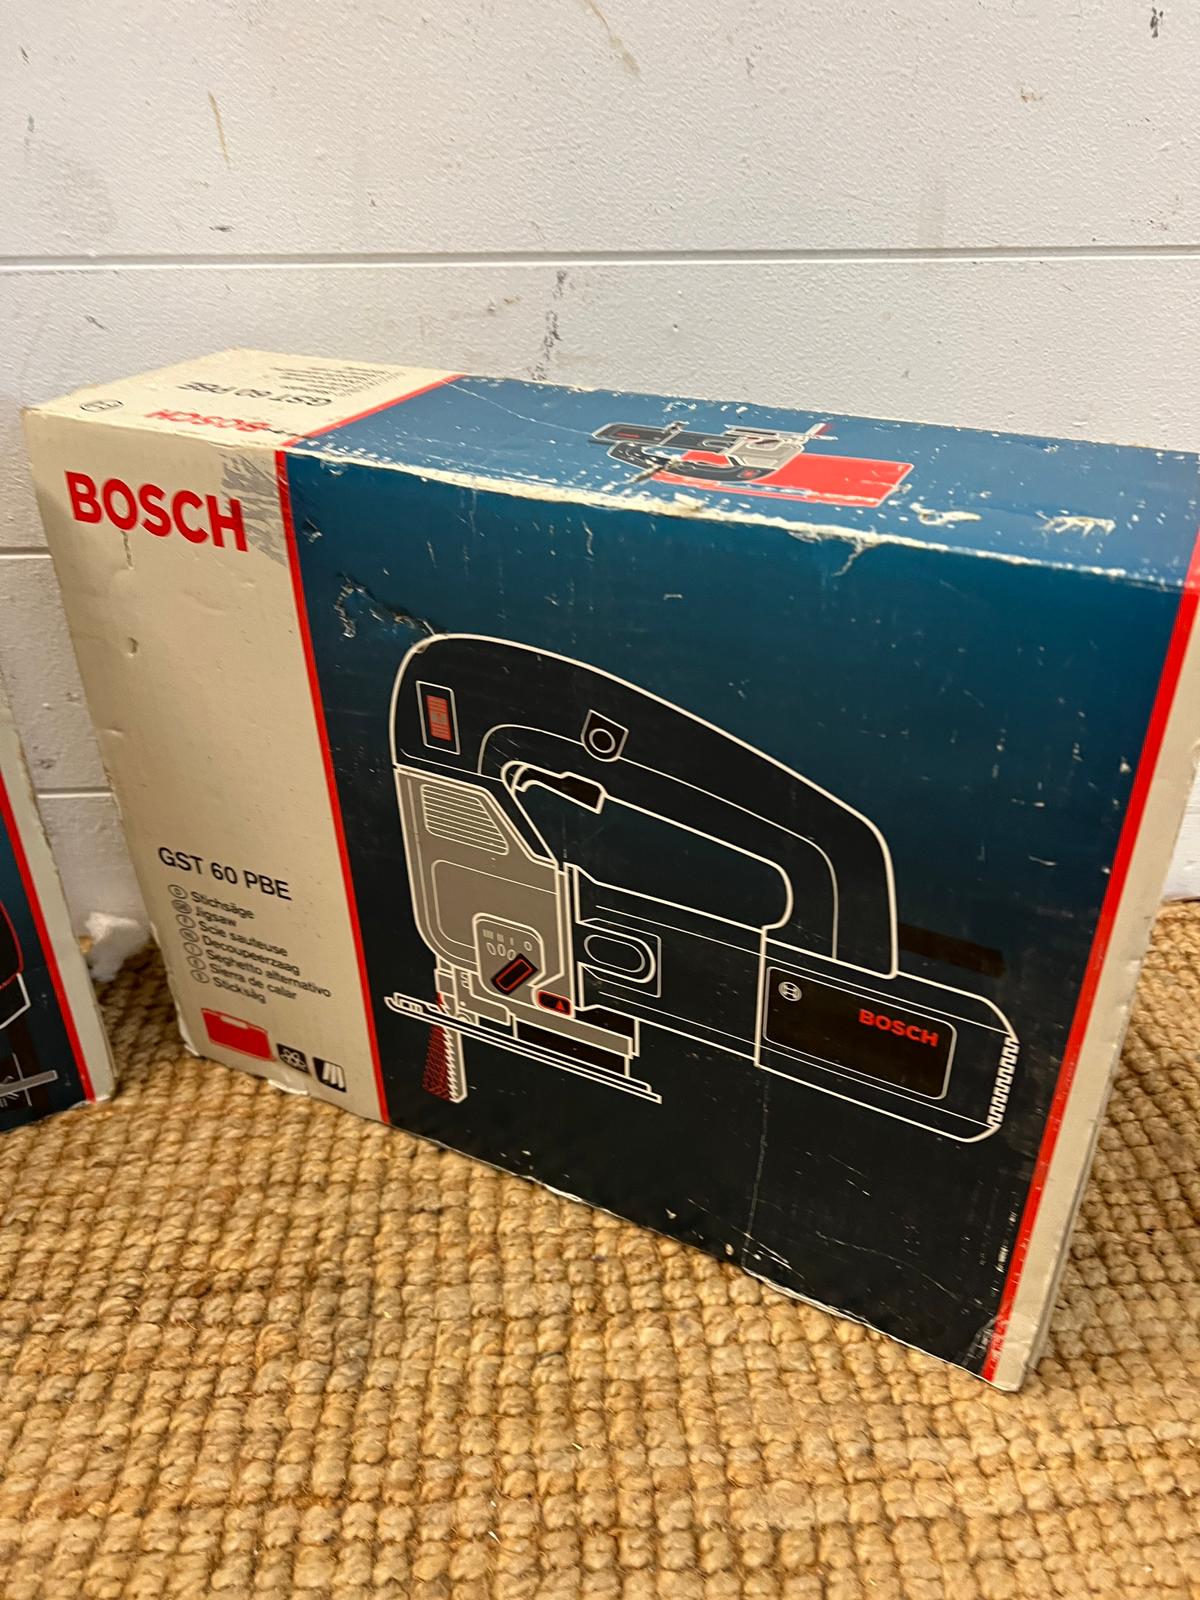 Two boxed Bosch power tools, a jigsaw and a impact drill - Image 3 of 3